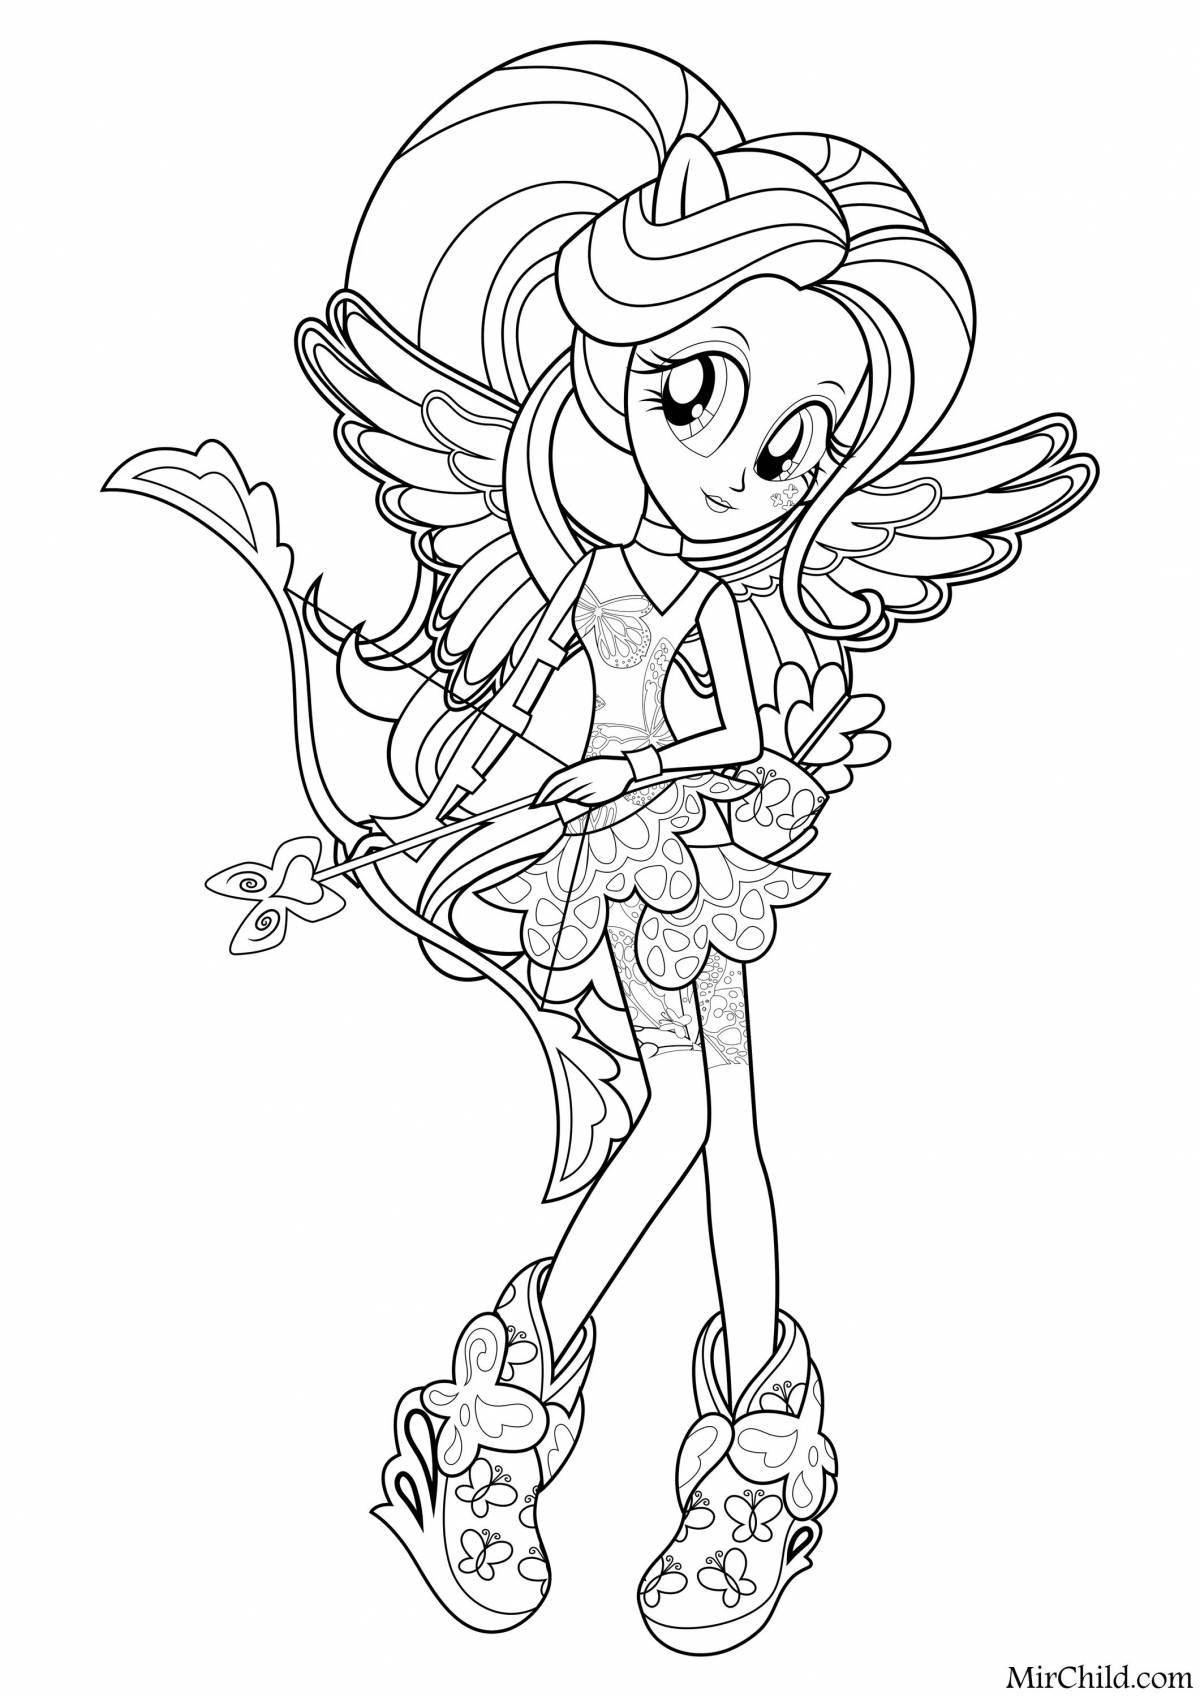 Fluttershy luxury coloring book